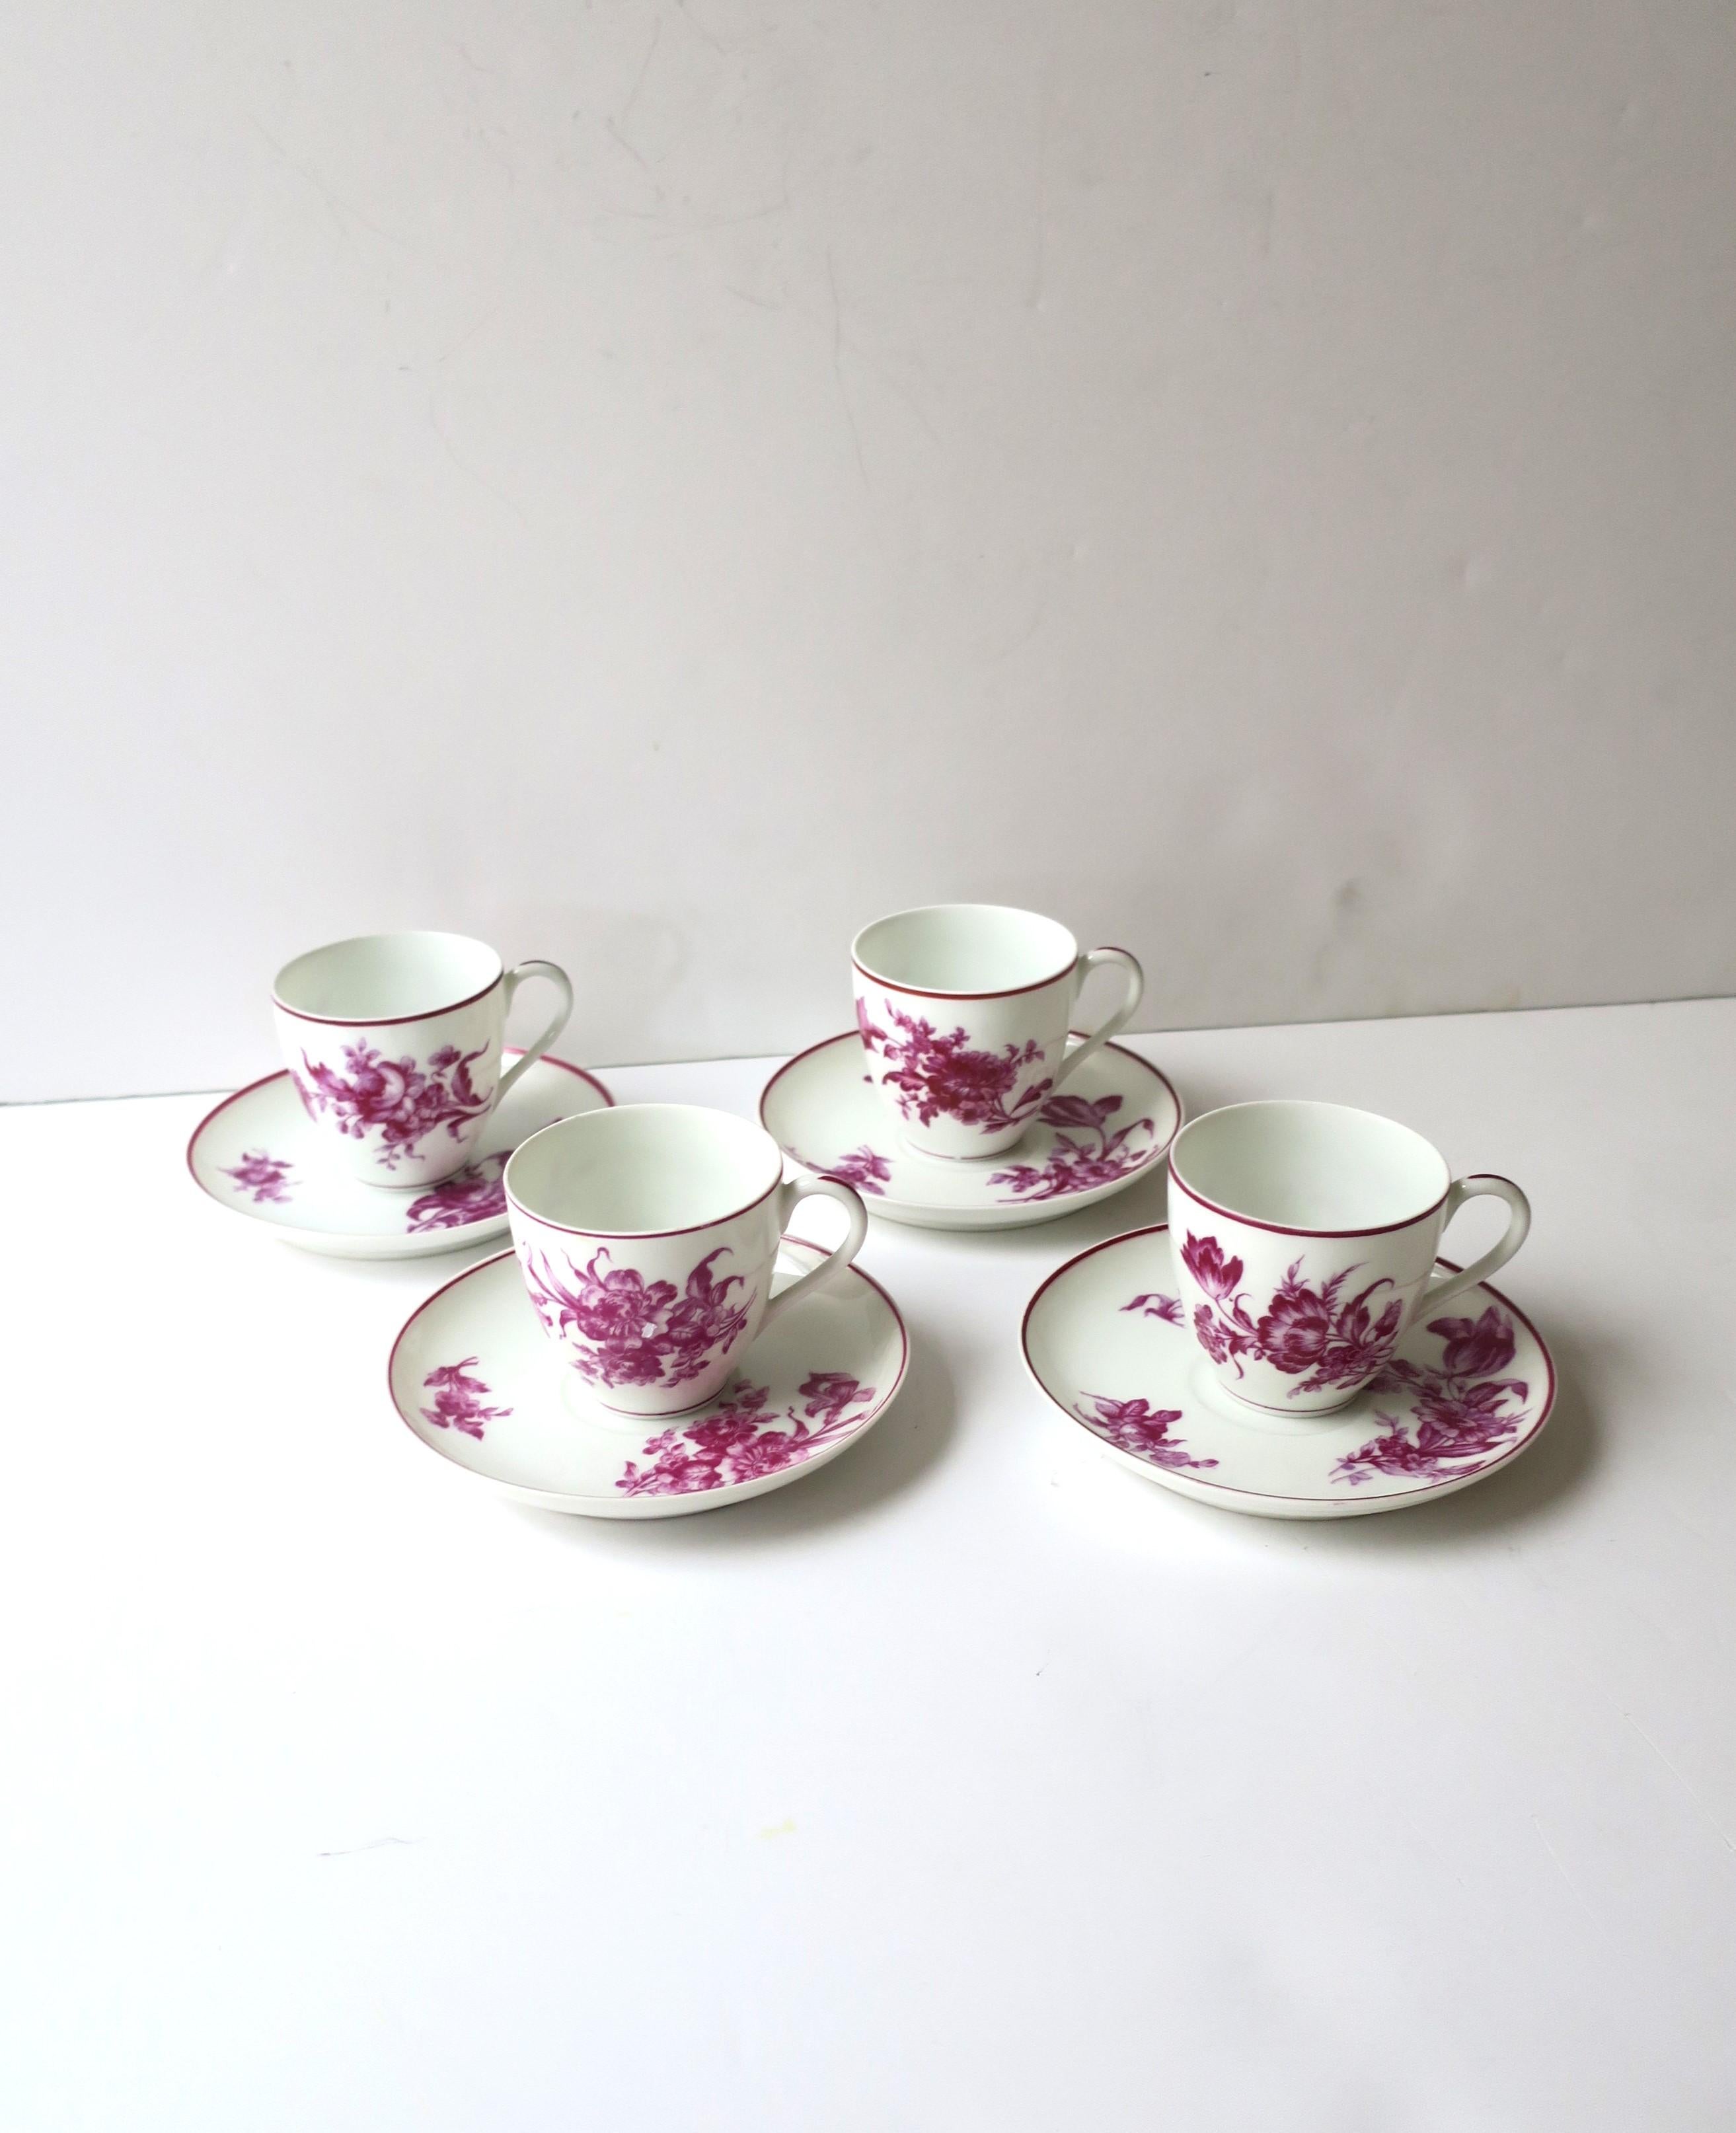 20th Century Paris French Porcelain Coffee Espresso or Tea Demitasse Cup & Saucer, Set of 4 For Sale